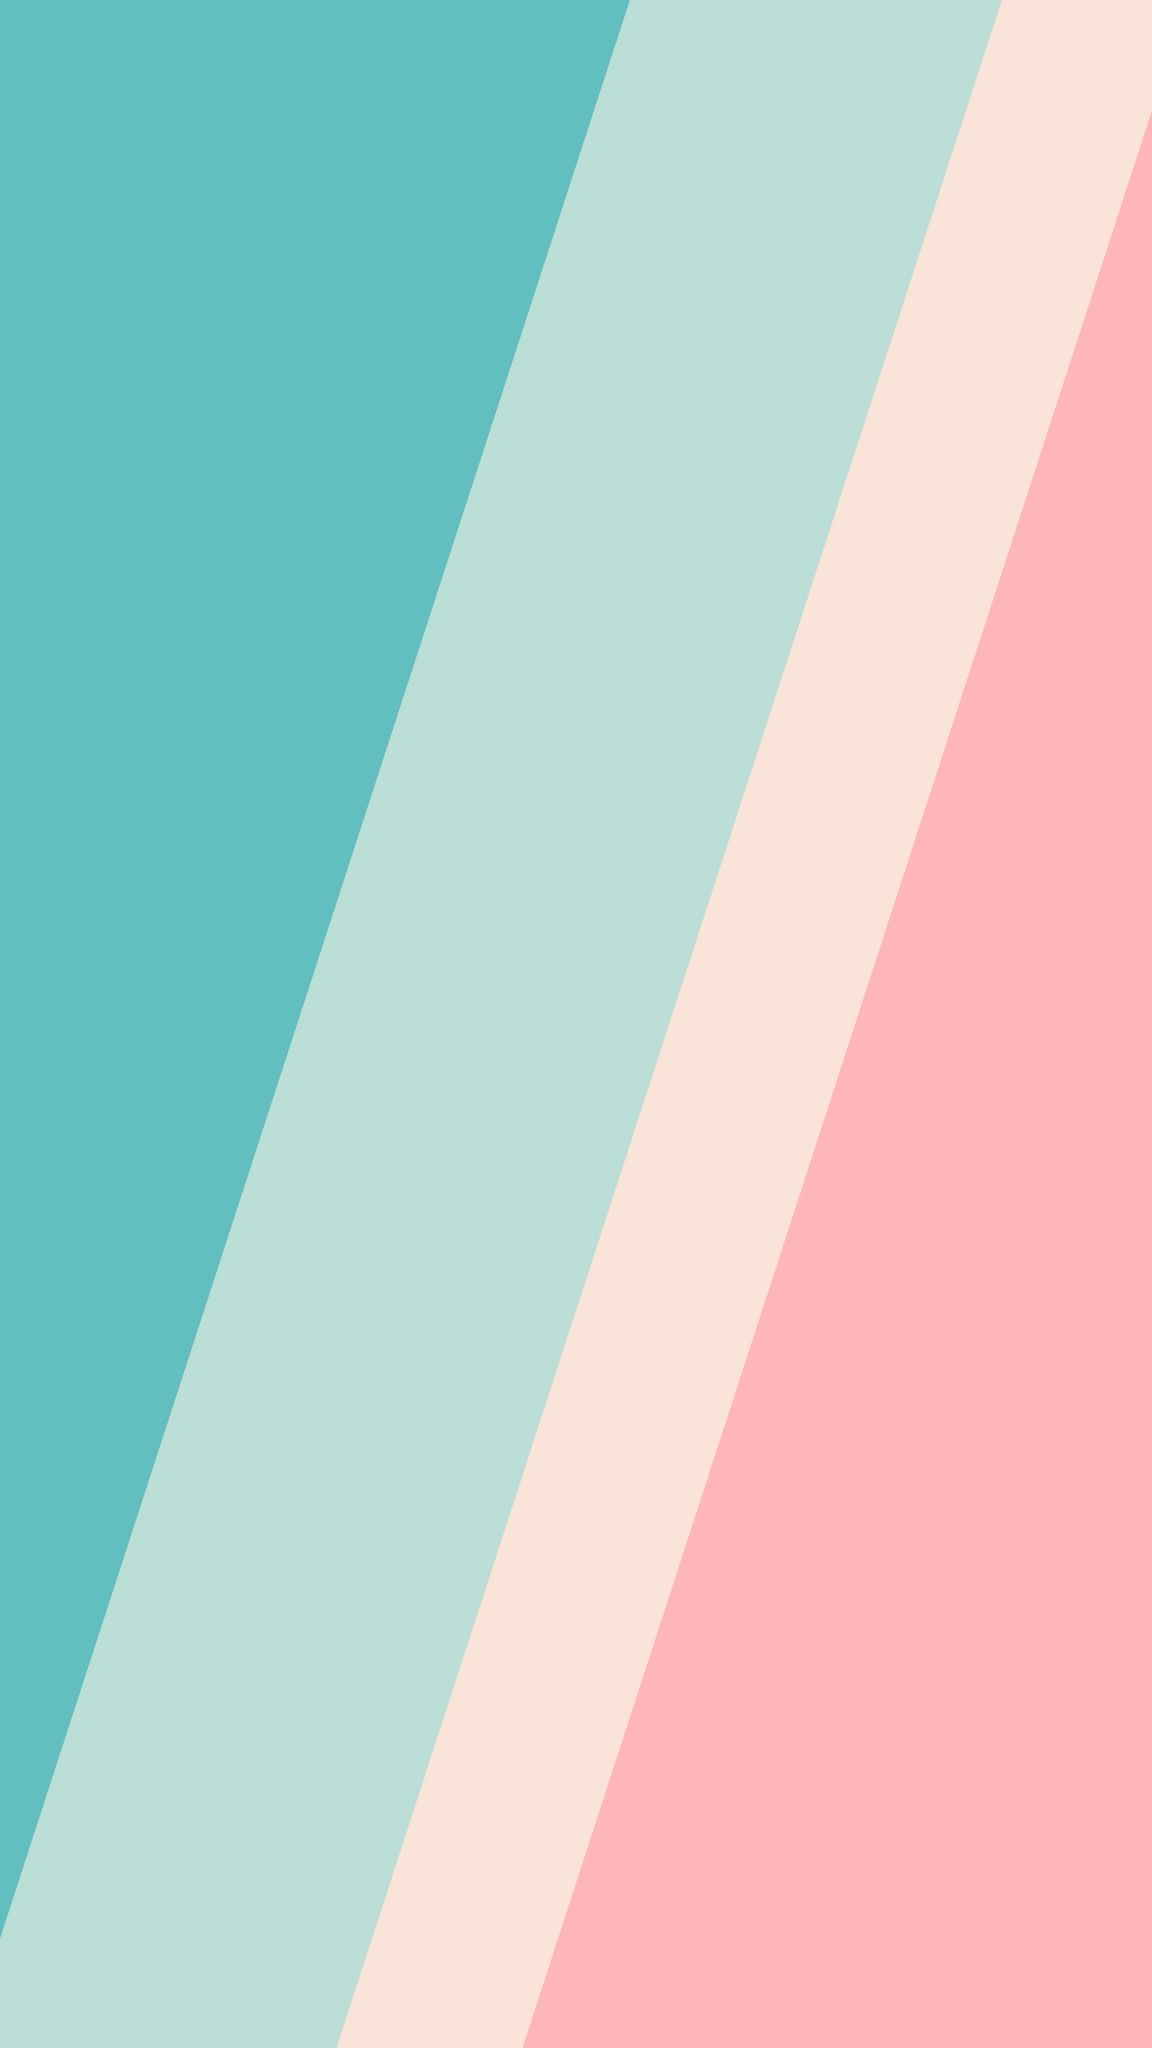 A graphic with three diagonal stripes of pink, white, and blue - Teal, clean